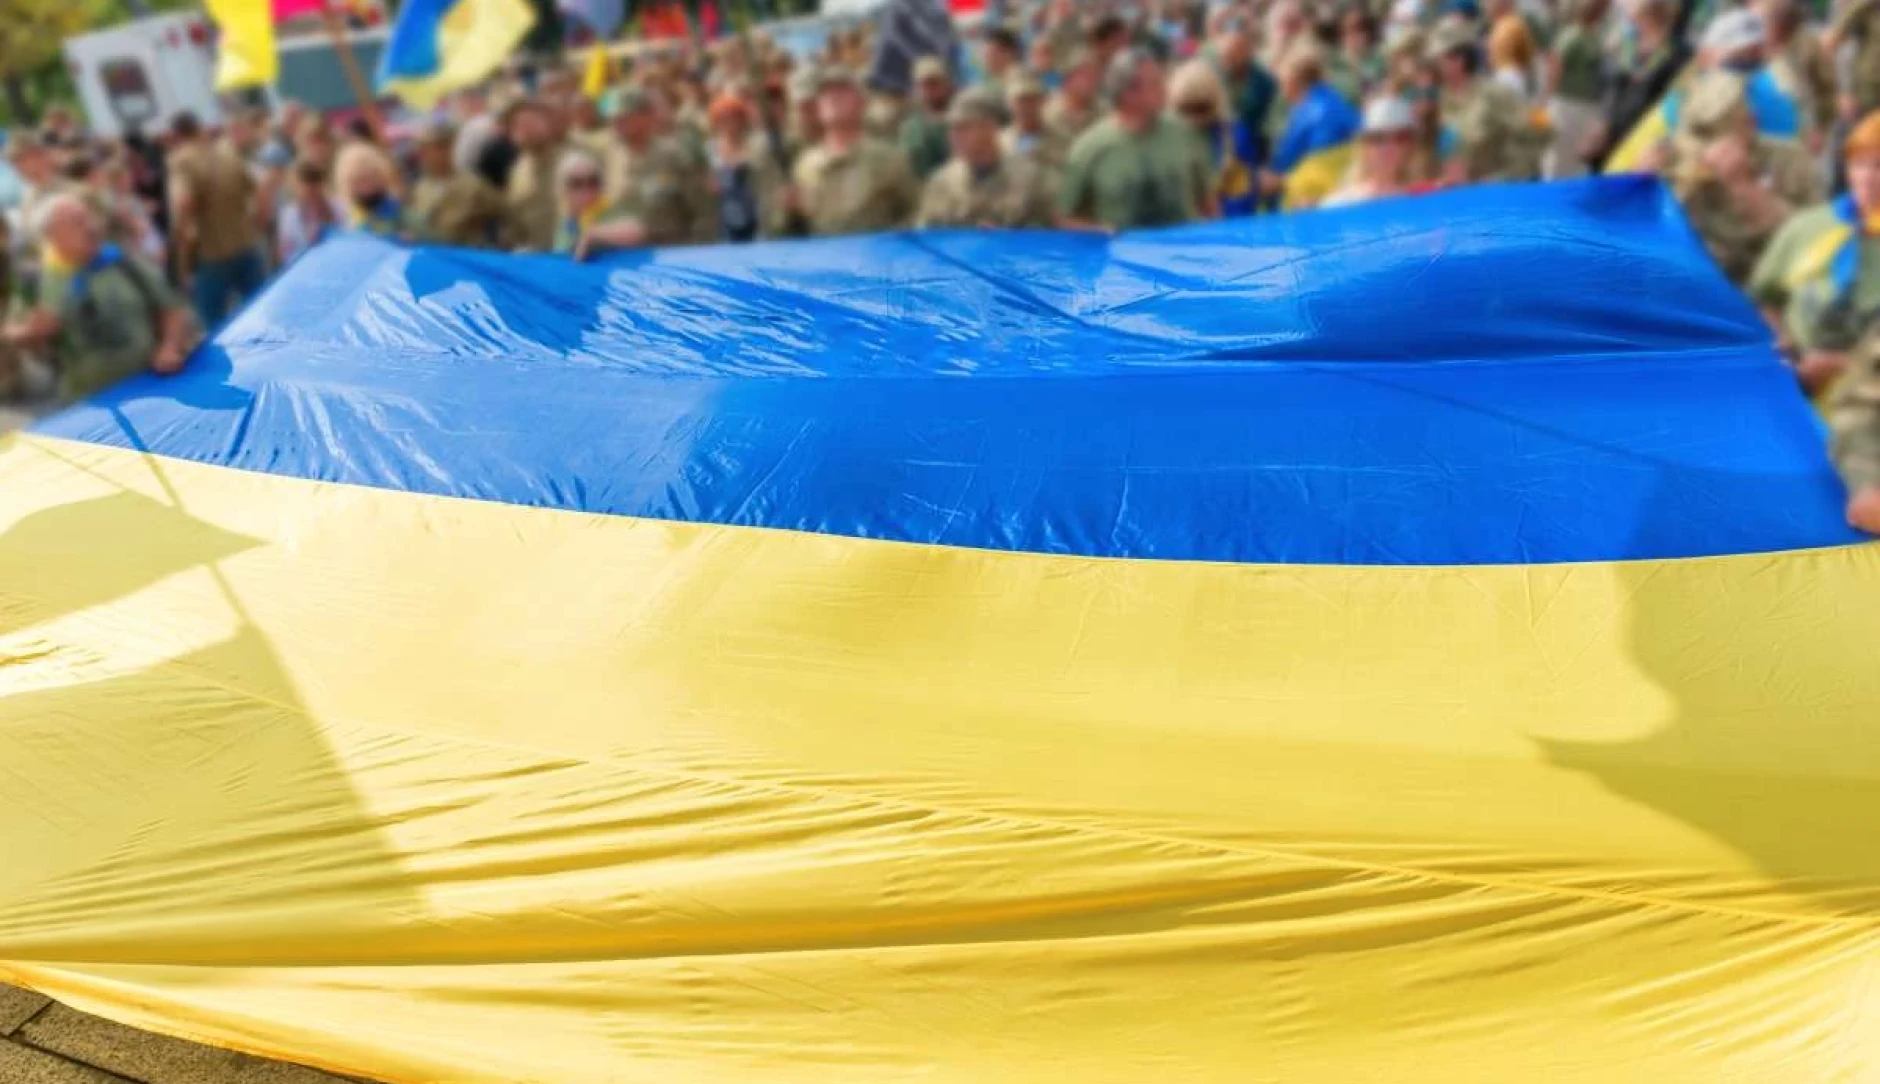 The Ukrainian flag in the foreground, with a group of people in the background